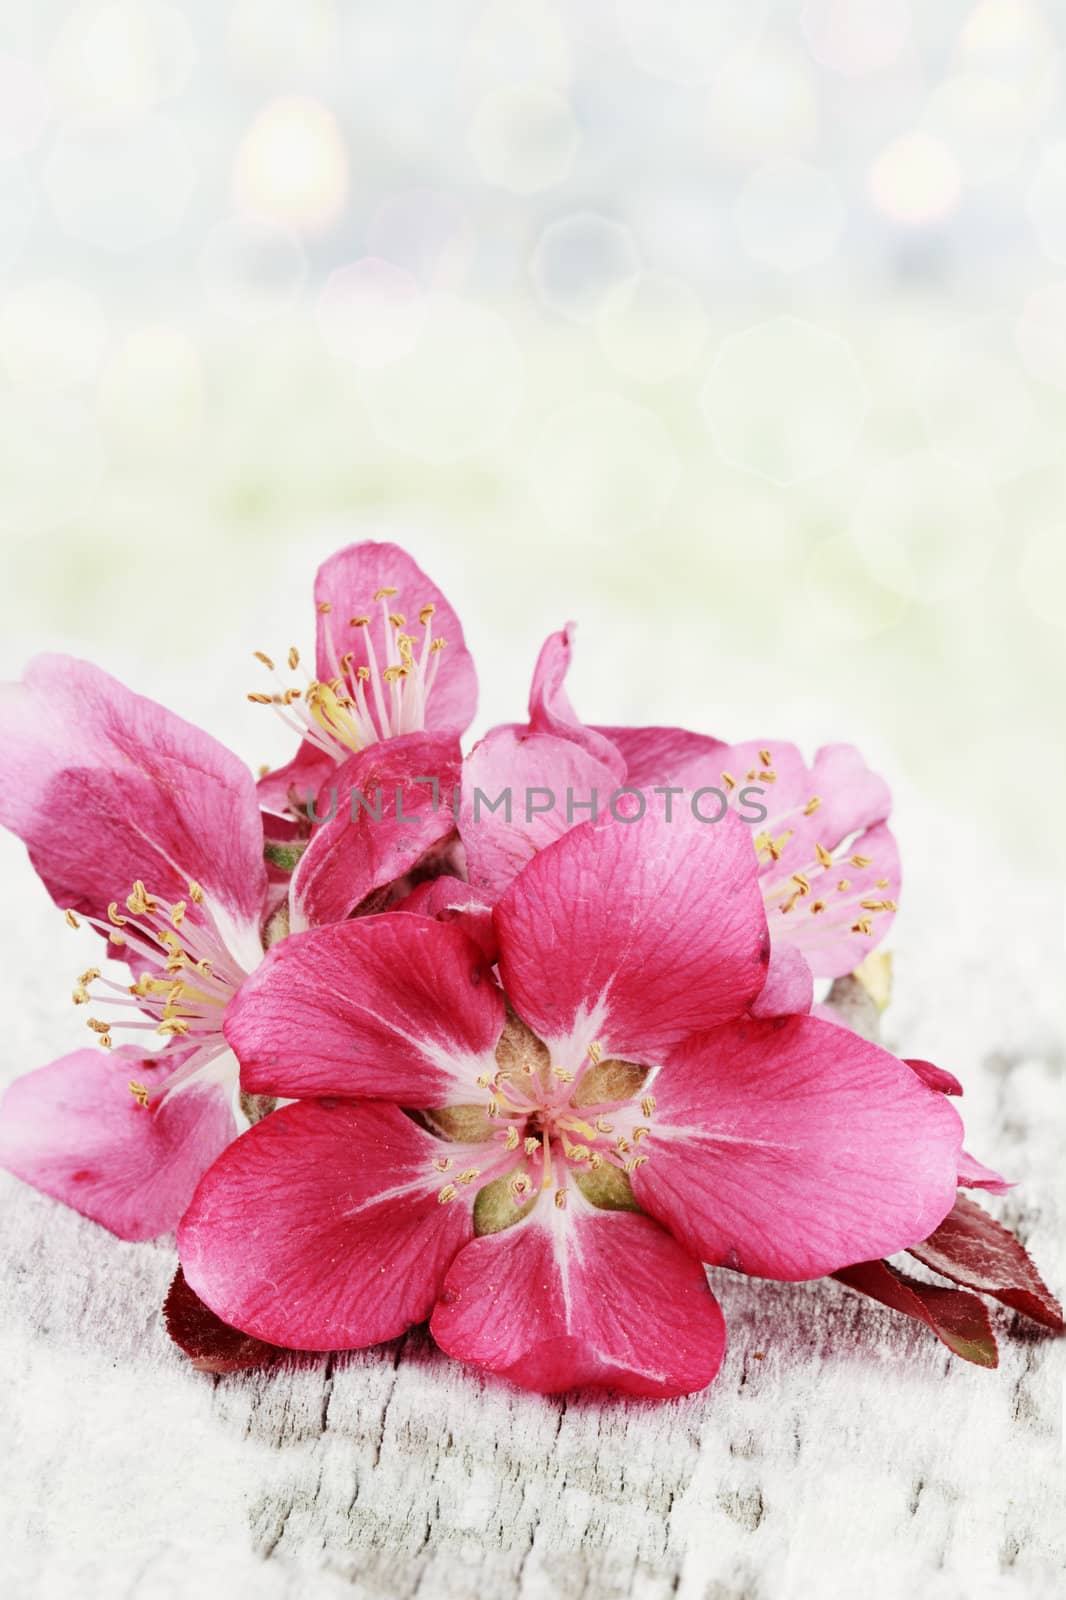 Apple blossoms on a rustic background with copy space.

